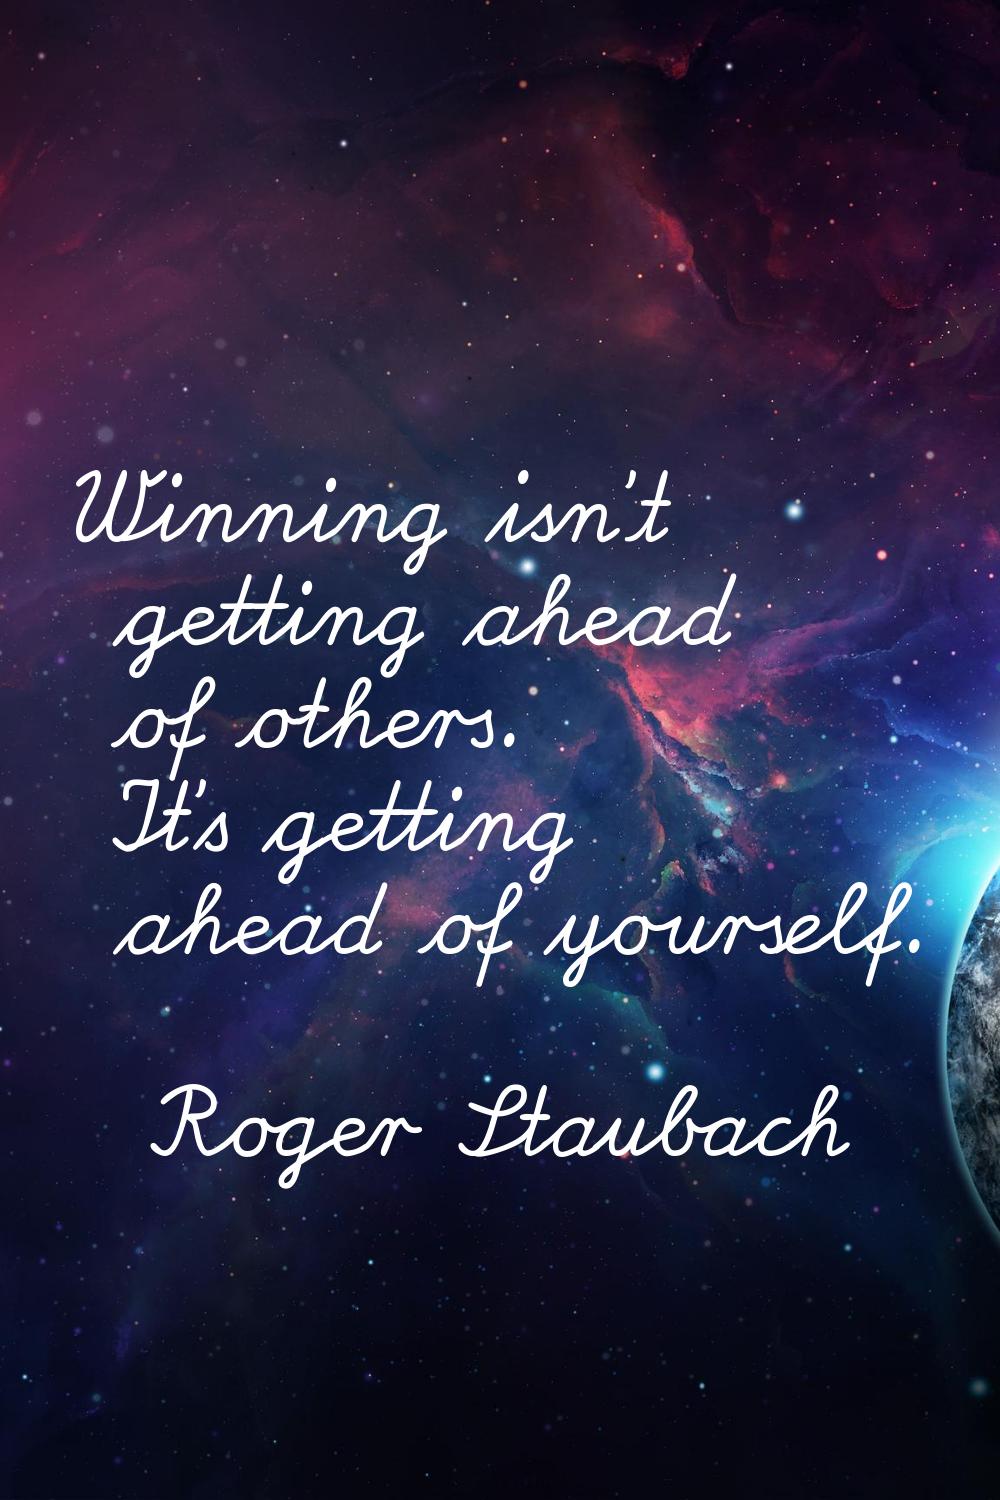 Winning isn't getting ahead of others. It's getting ahead of yourself.